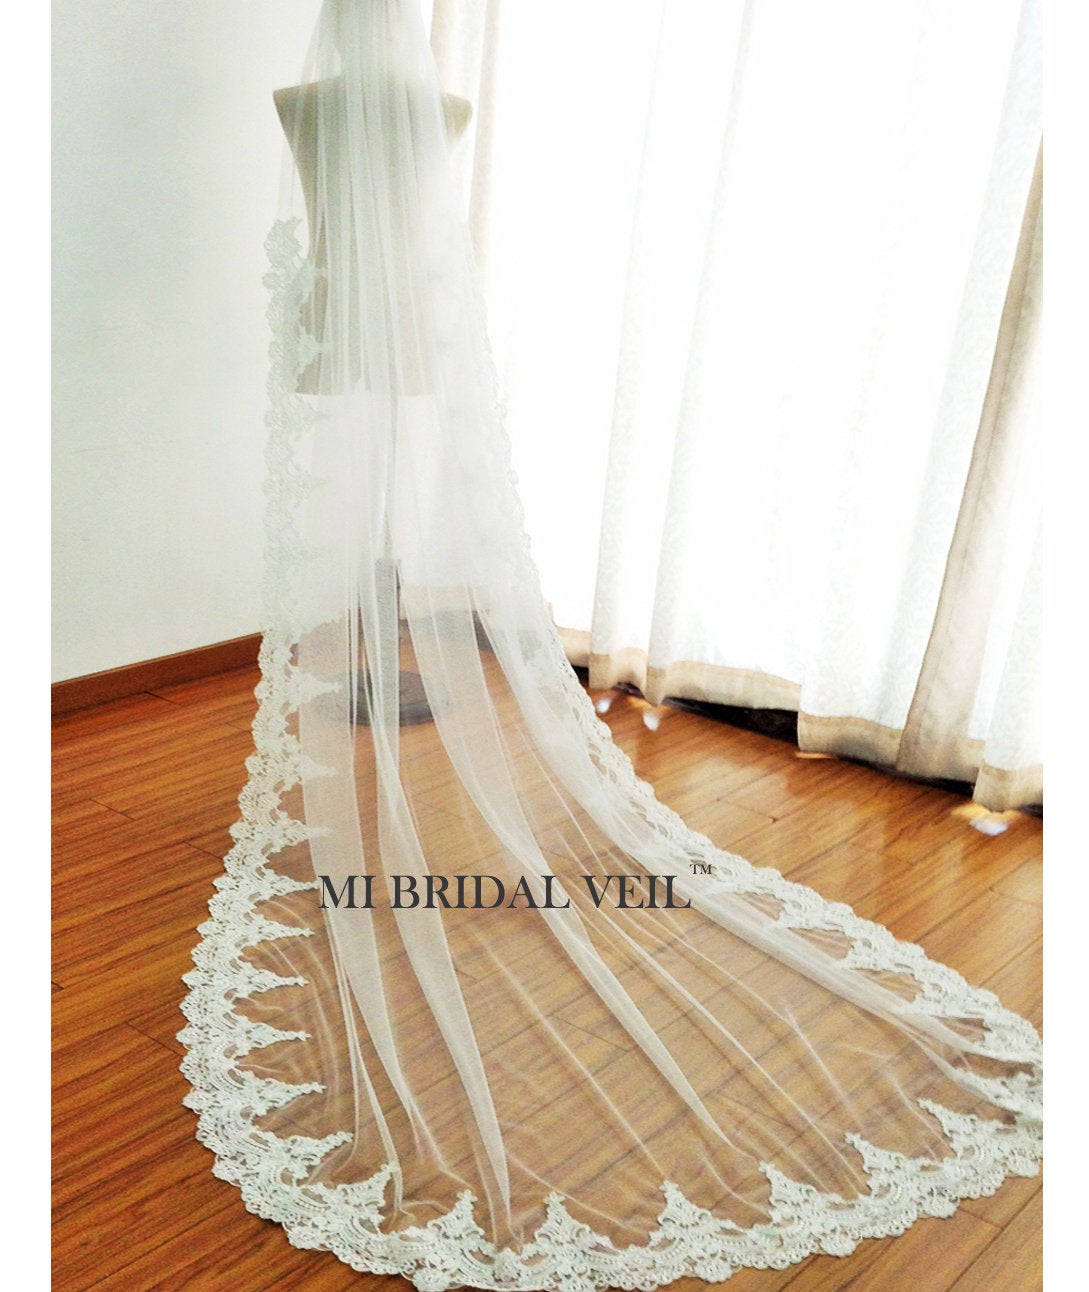 Cathedral Lace Wedding Veil, Edwardian Inspired Lace at Elbow, Mi Bridal